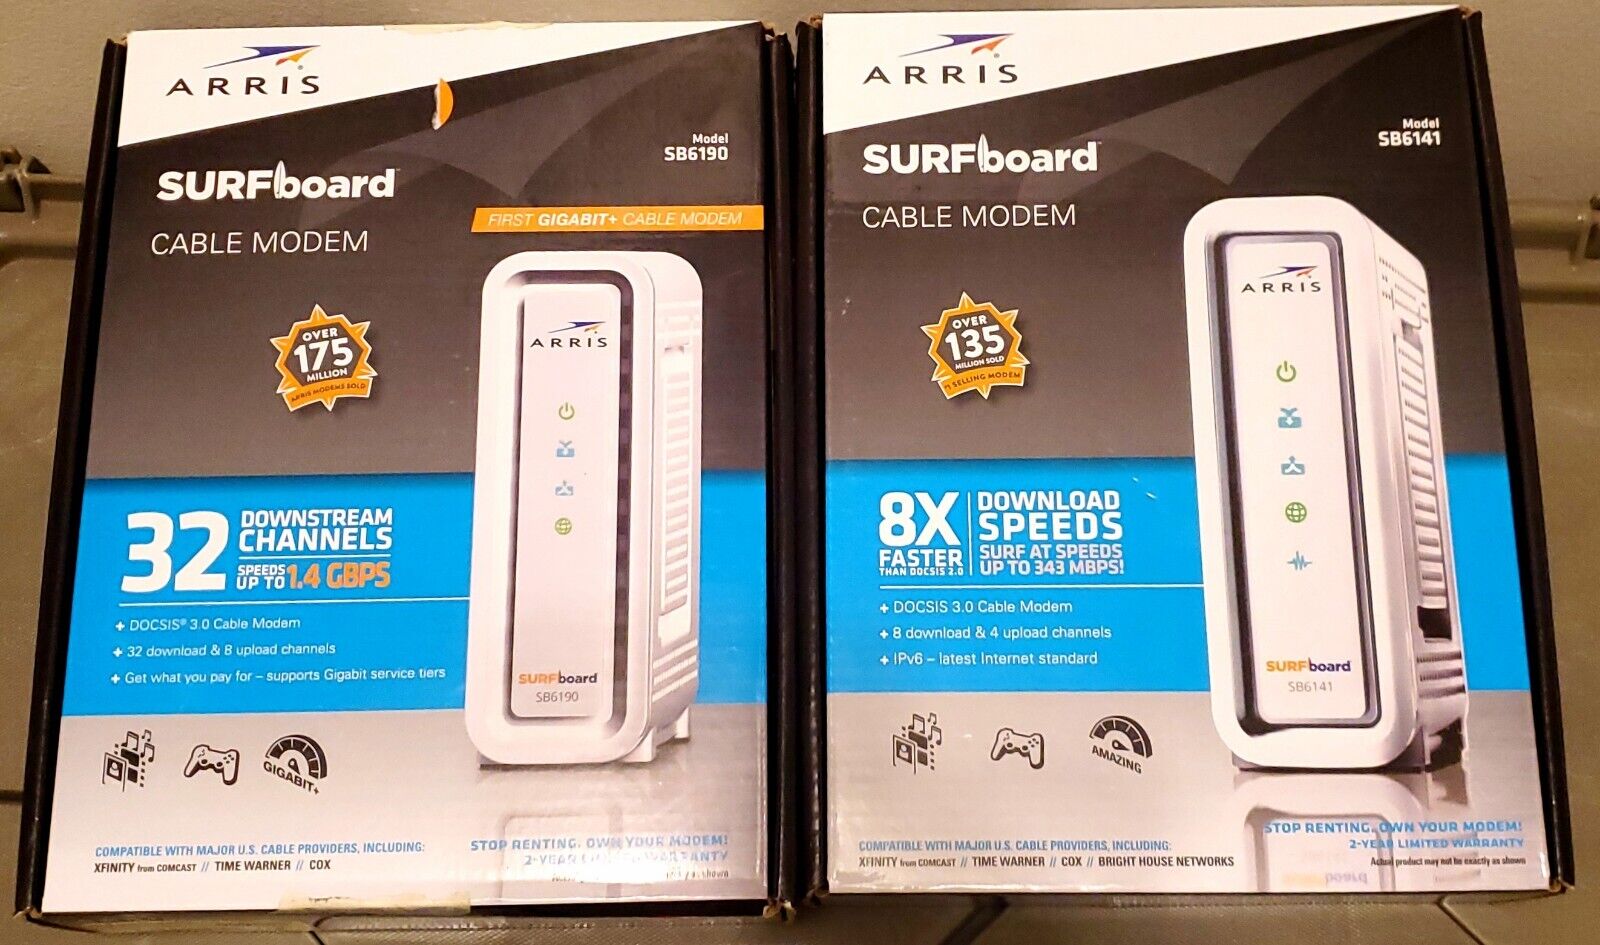 Lot Of 2 Arris Surfboard Cable Modems In Original Boxes, No Power Supply